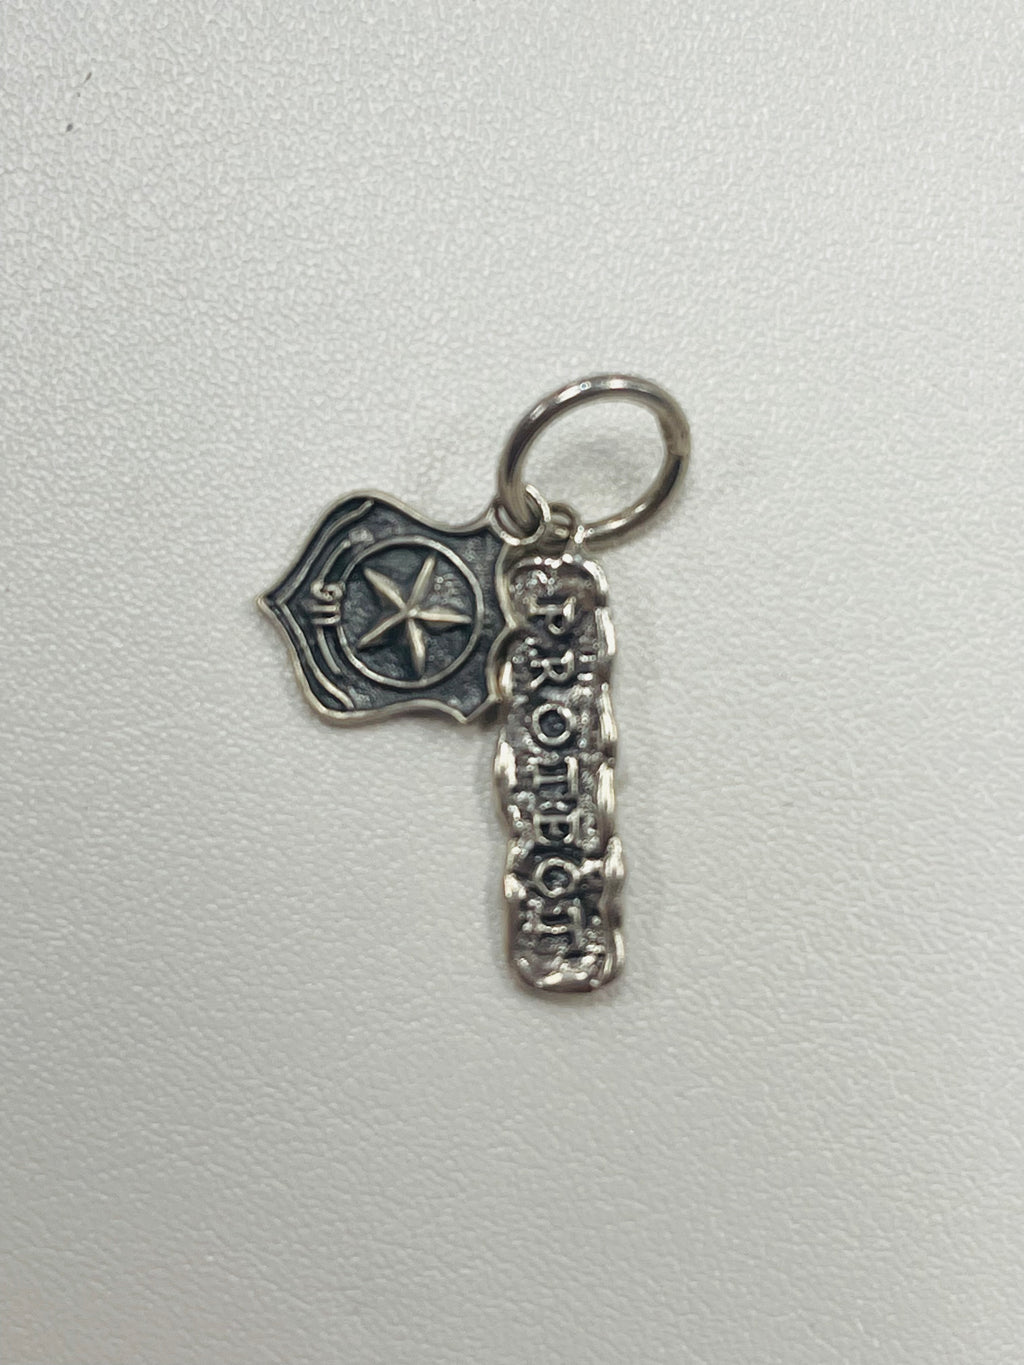 Waxing Poetic Worthy Vocations Charm - Police - Protect